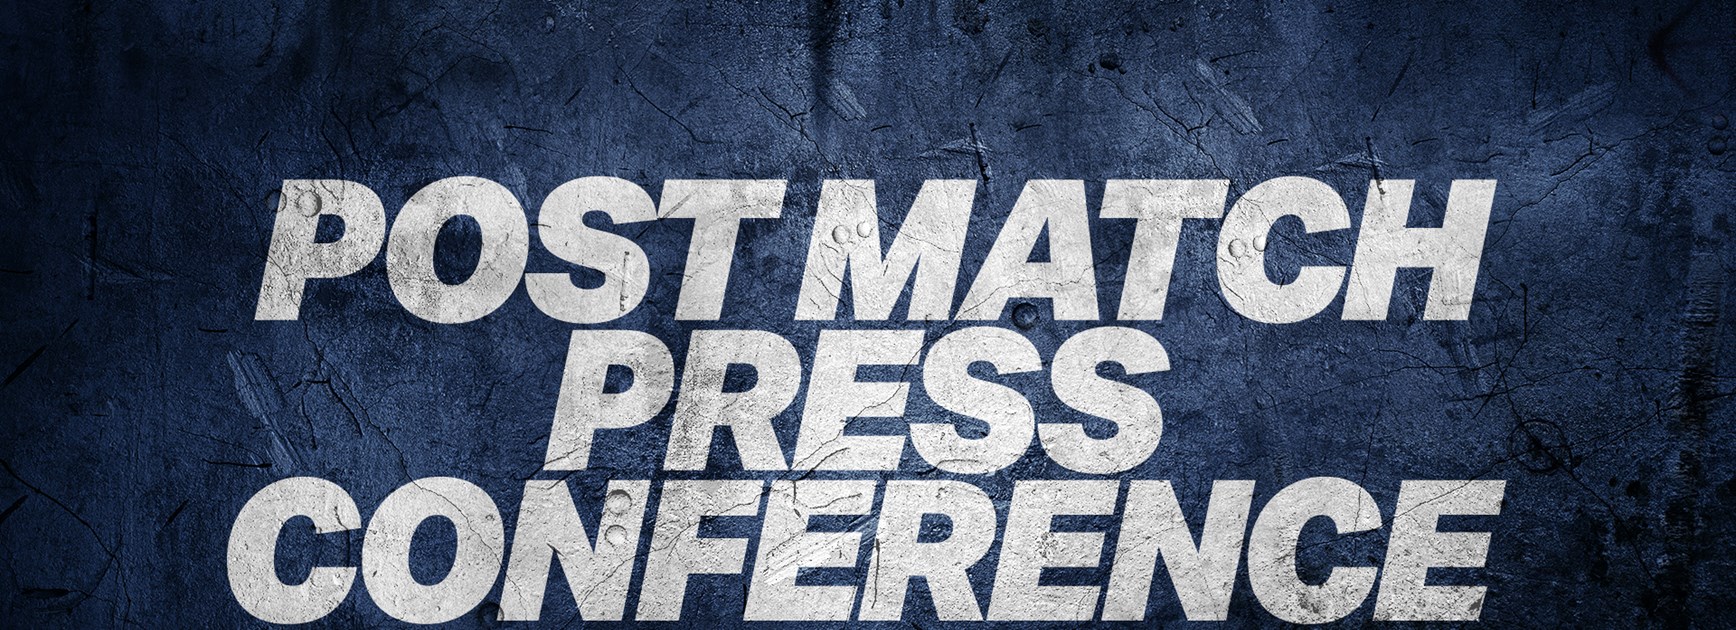 Watch: All the Saturday press conferences